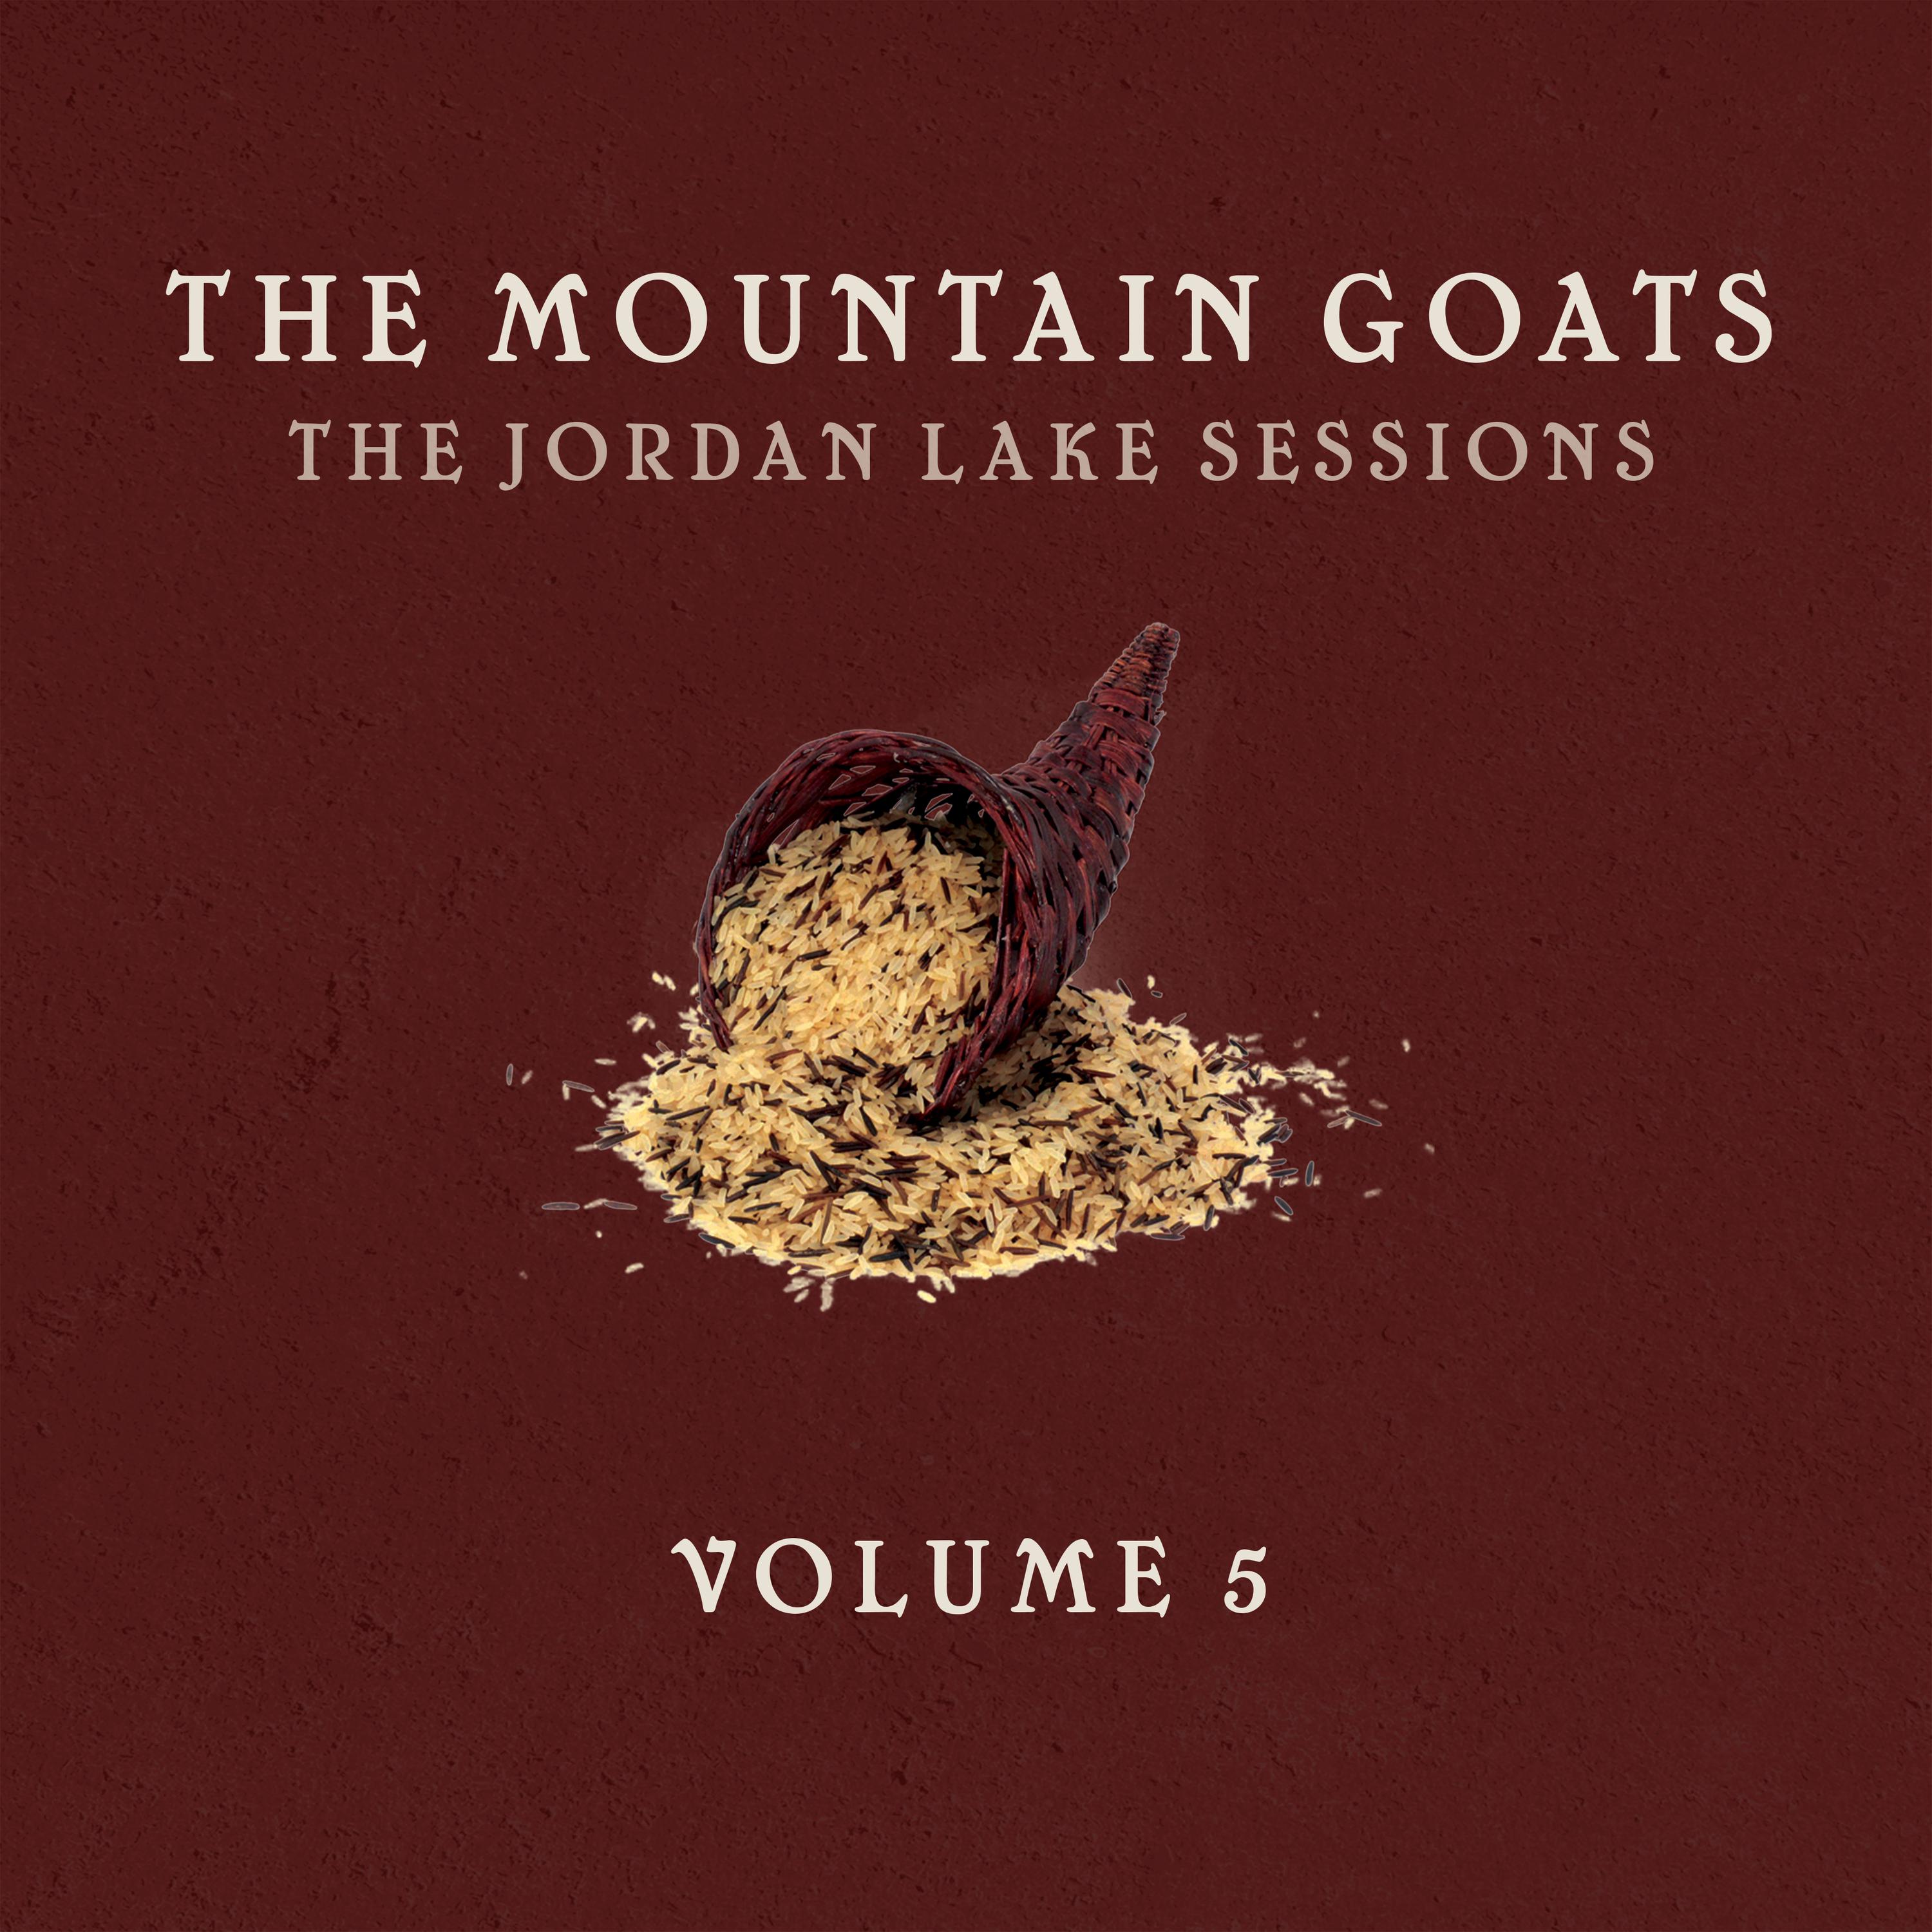 The Mountain Goats - Choked Out (The Jordan Lake Sessions Volume 5)